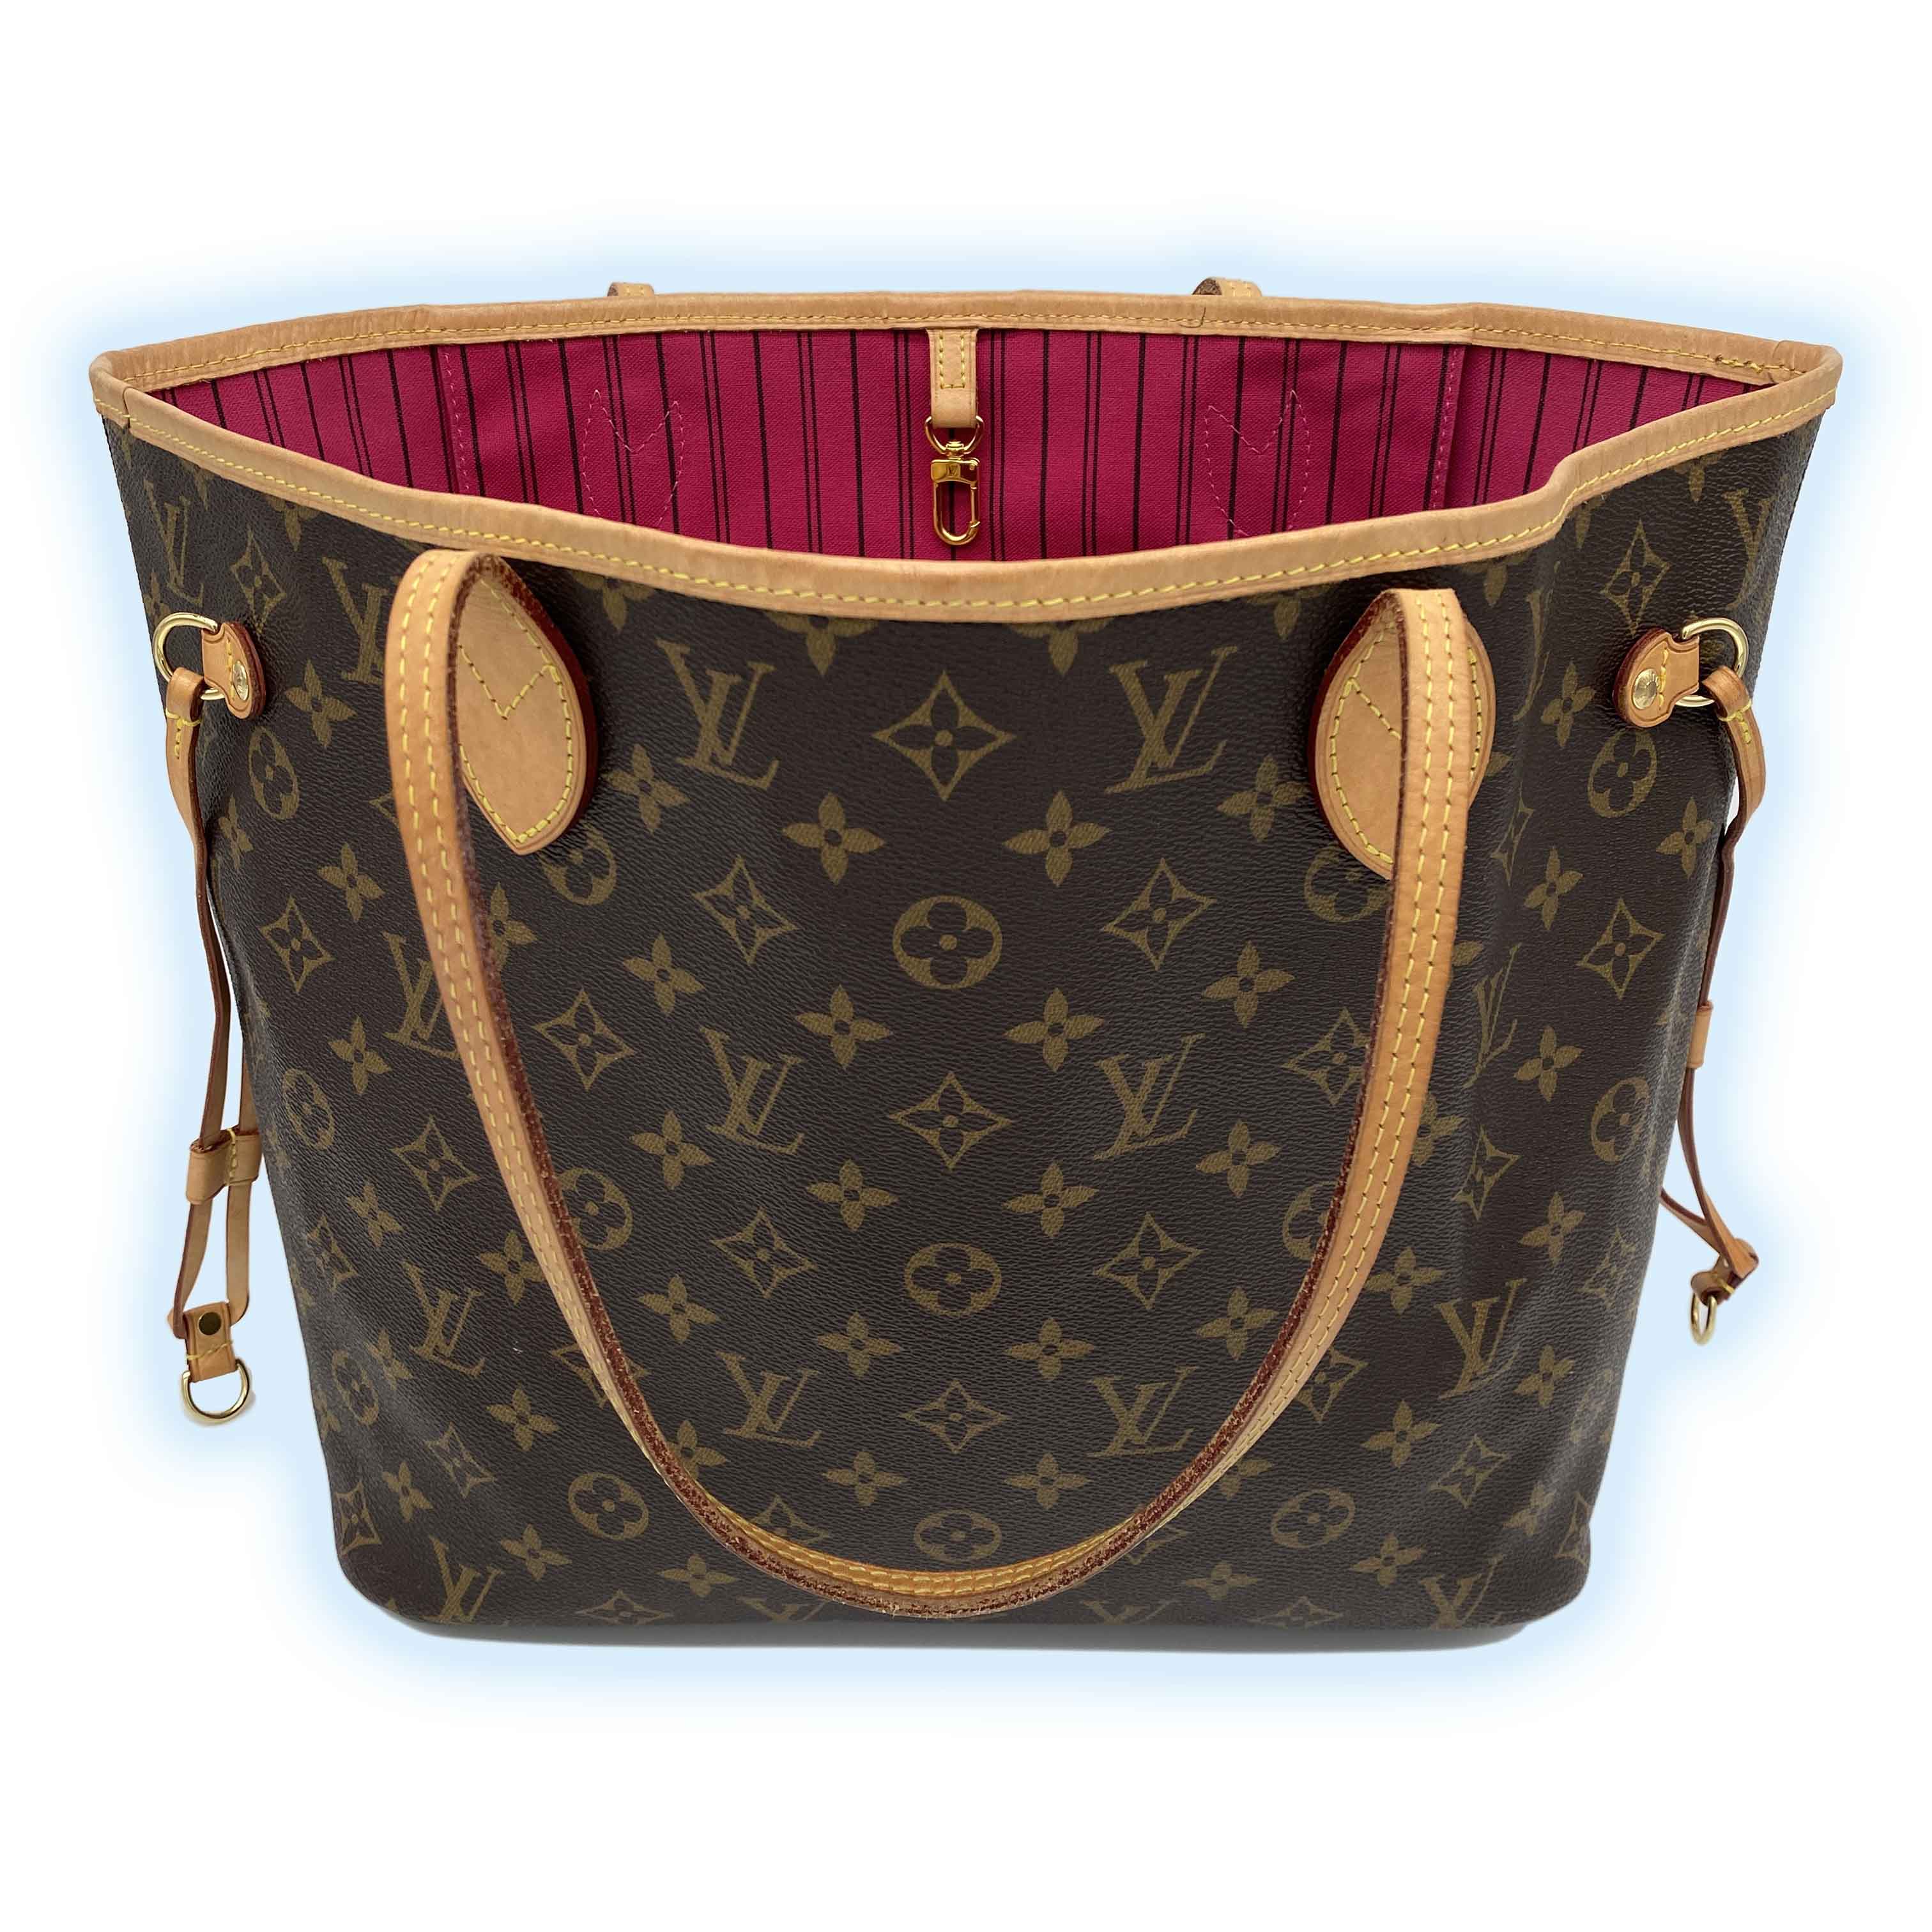 Unboxing my Louis Vuitton Neverfull GM in Monogram with Peony